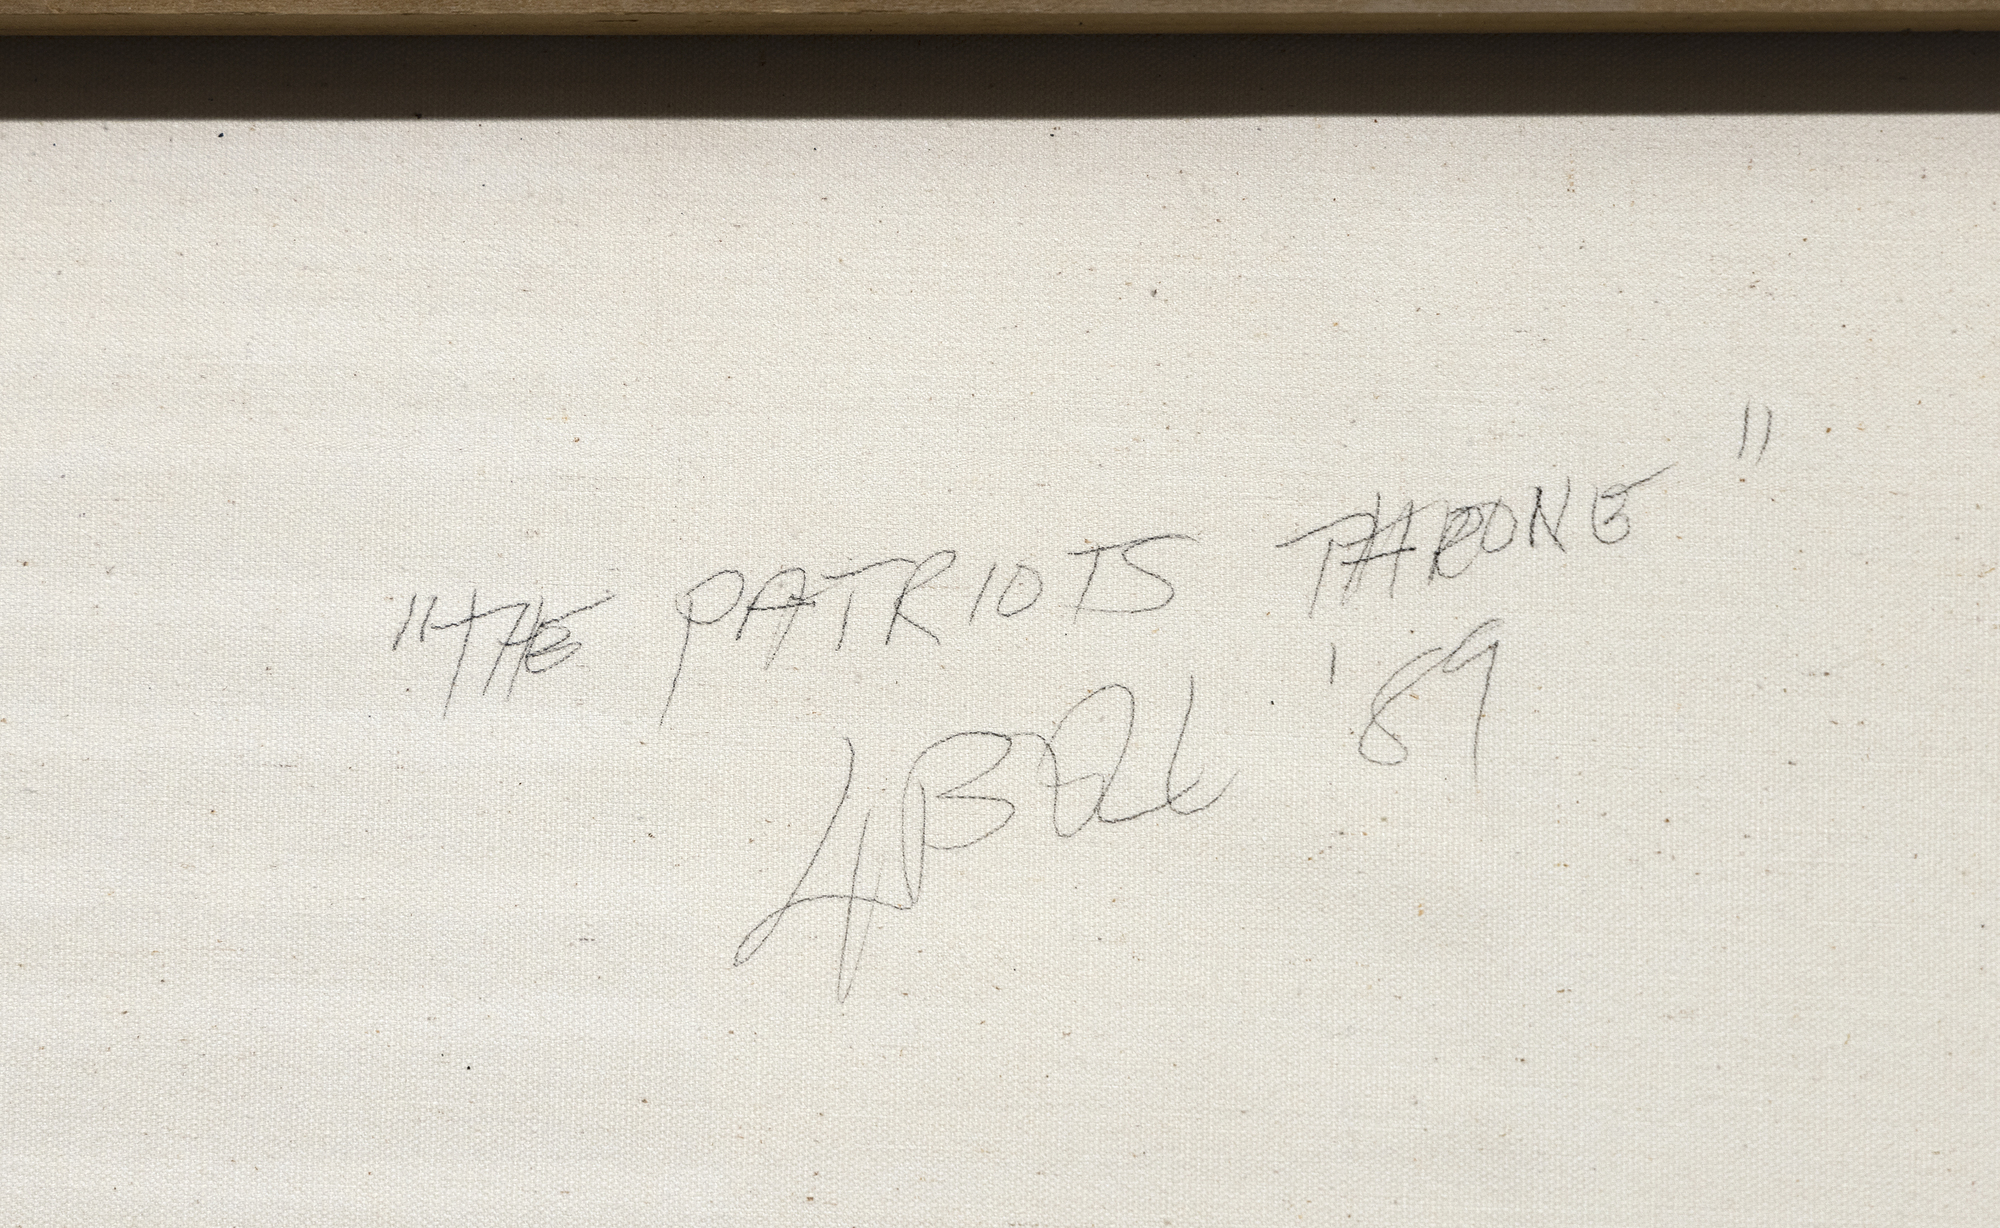 LARRY BELL - Patriots Throne - oil and metal on canvas - 63 x 41 1/2 x 1 1/4 in.